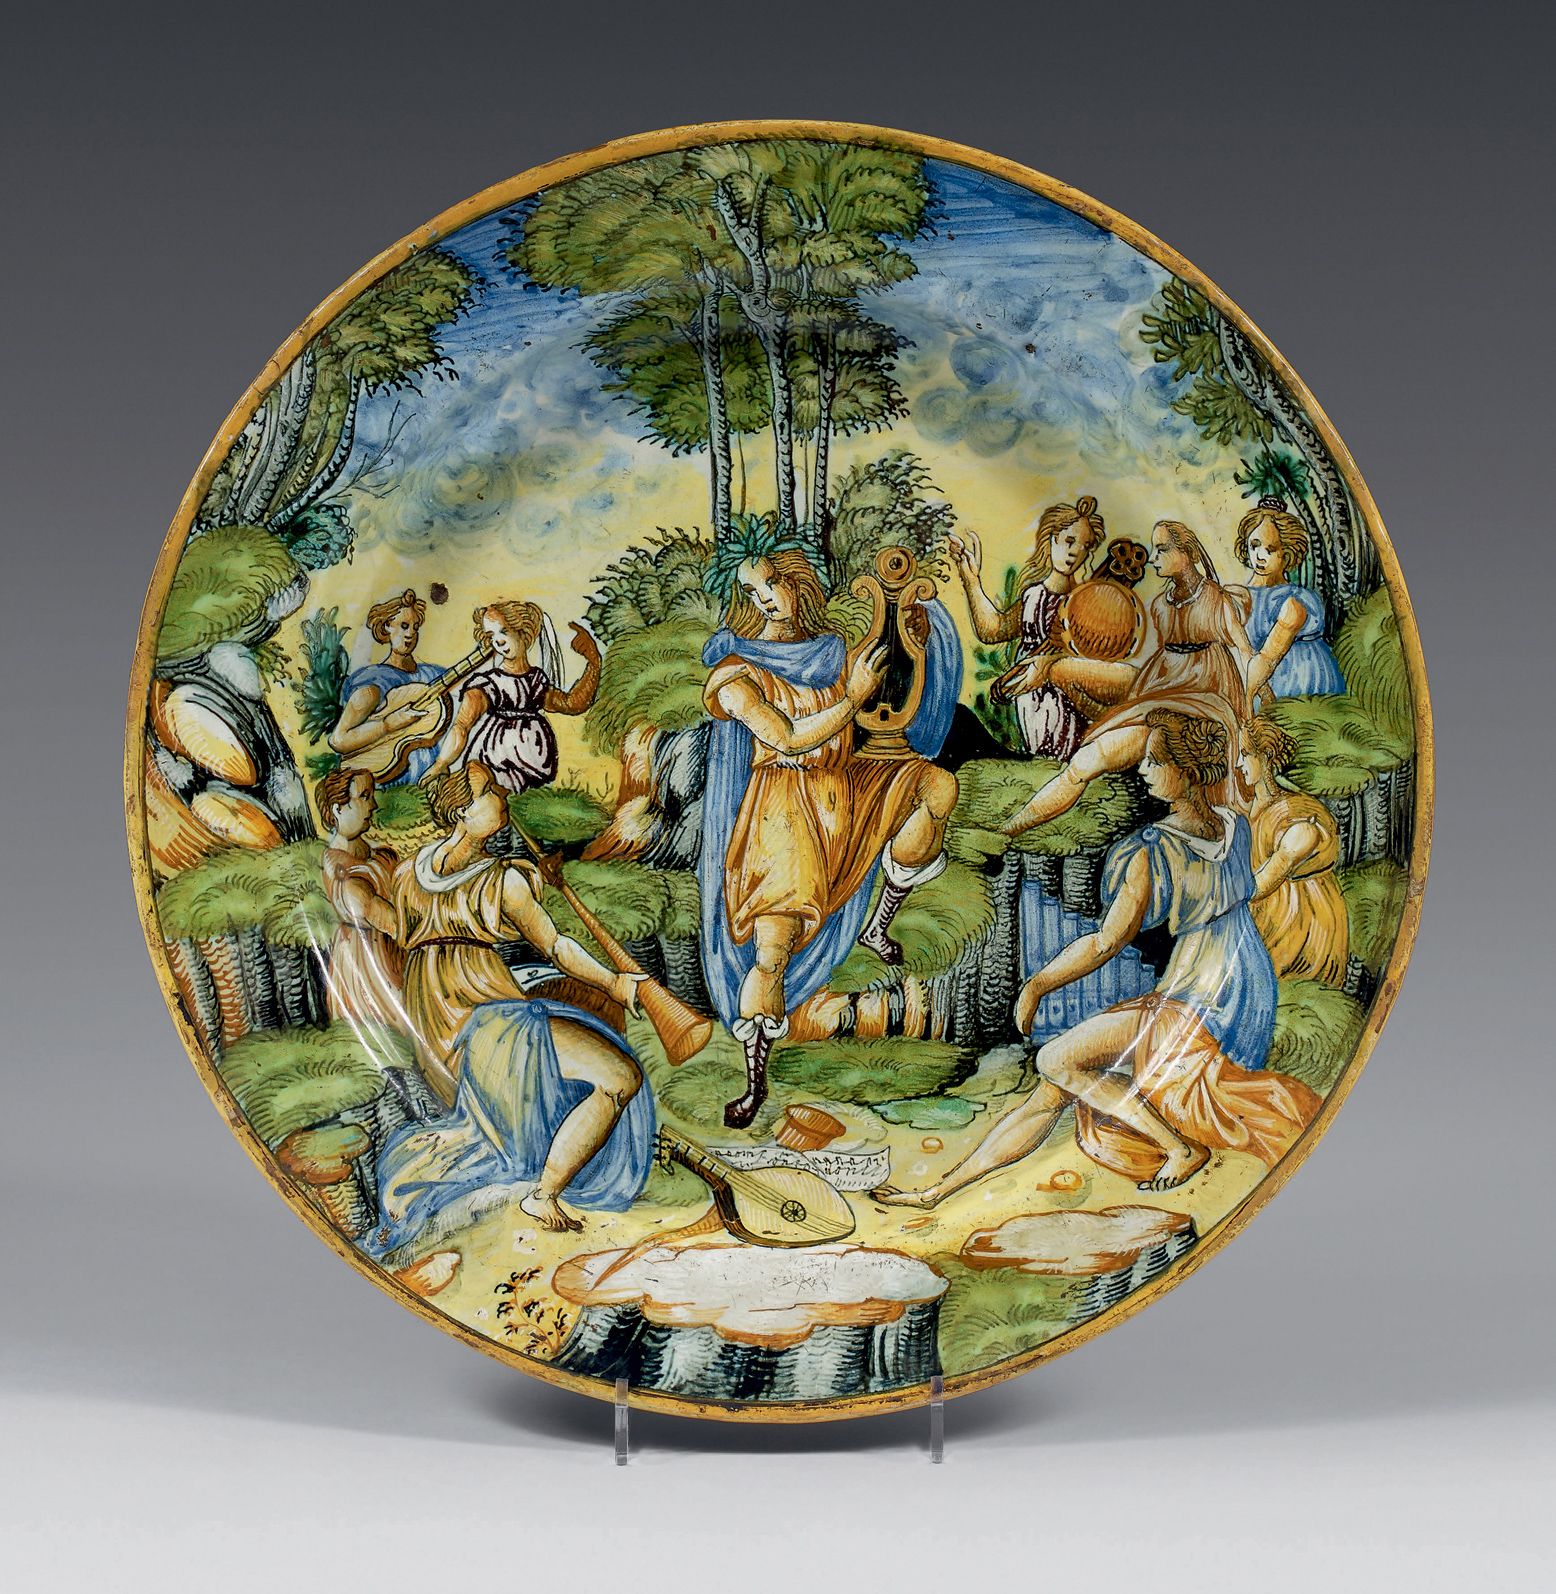 Null LYON or NEVERS Lyon earthenware dish, late 16th-early 17th century.
17th ce&hellip;